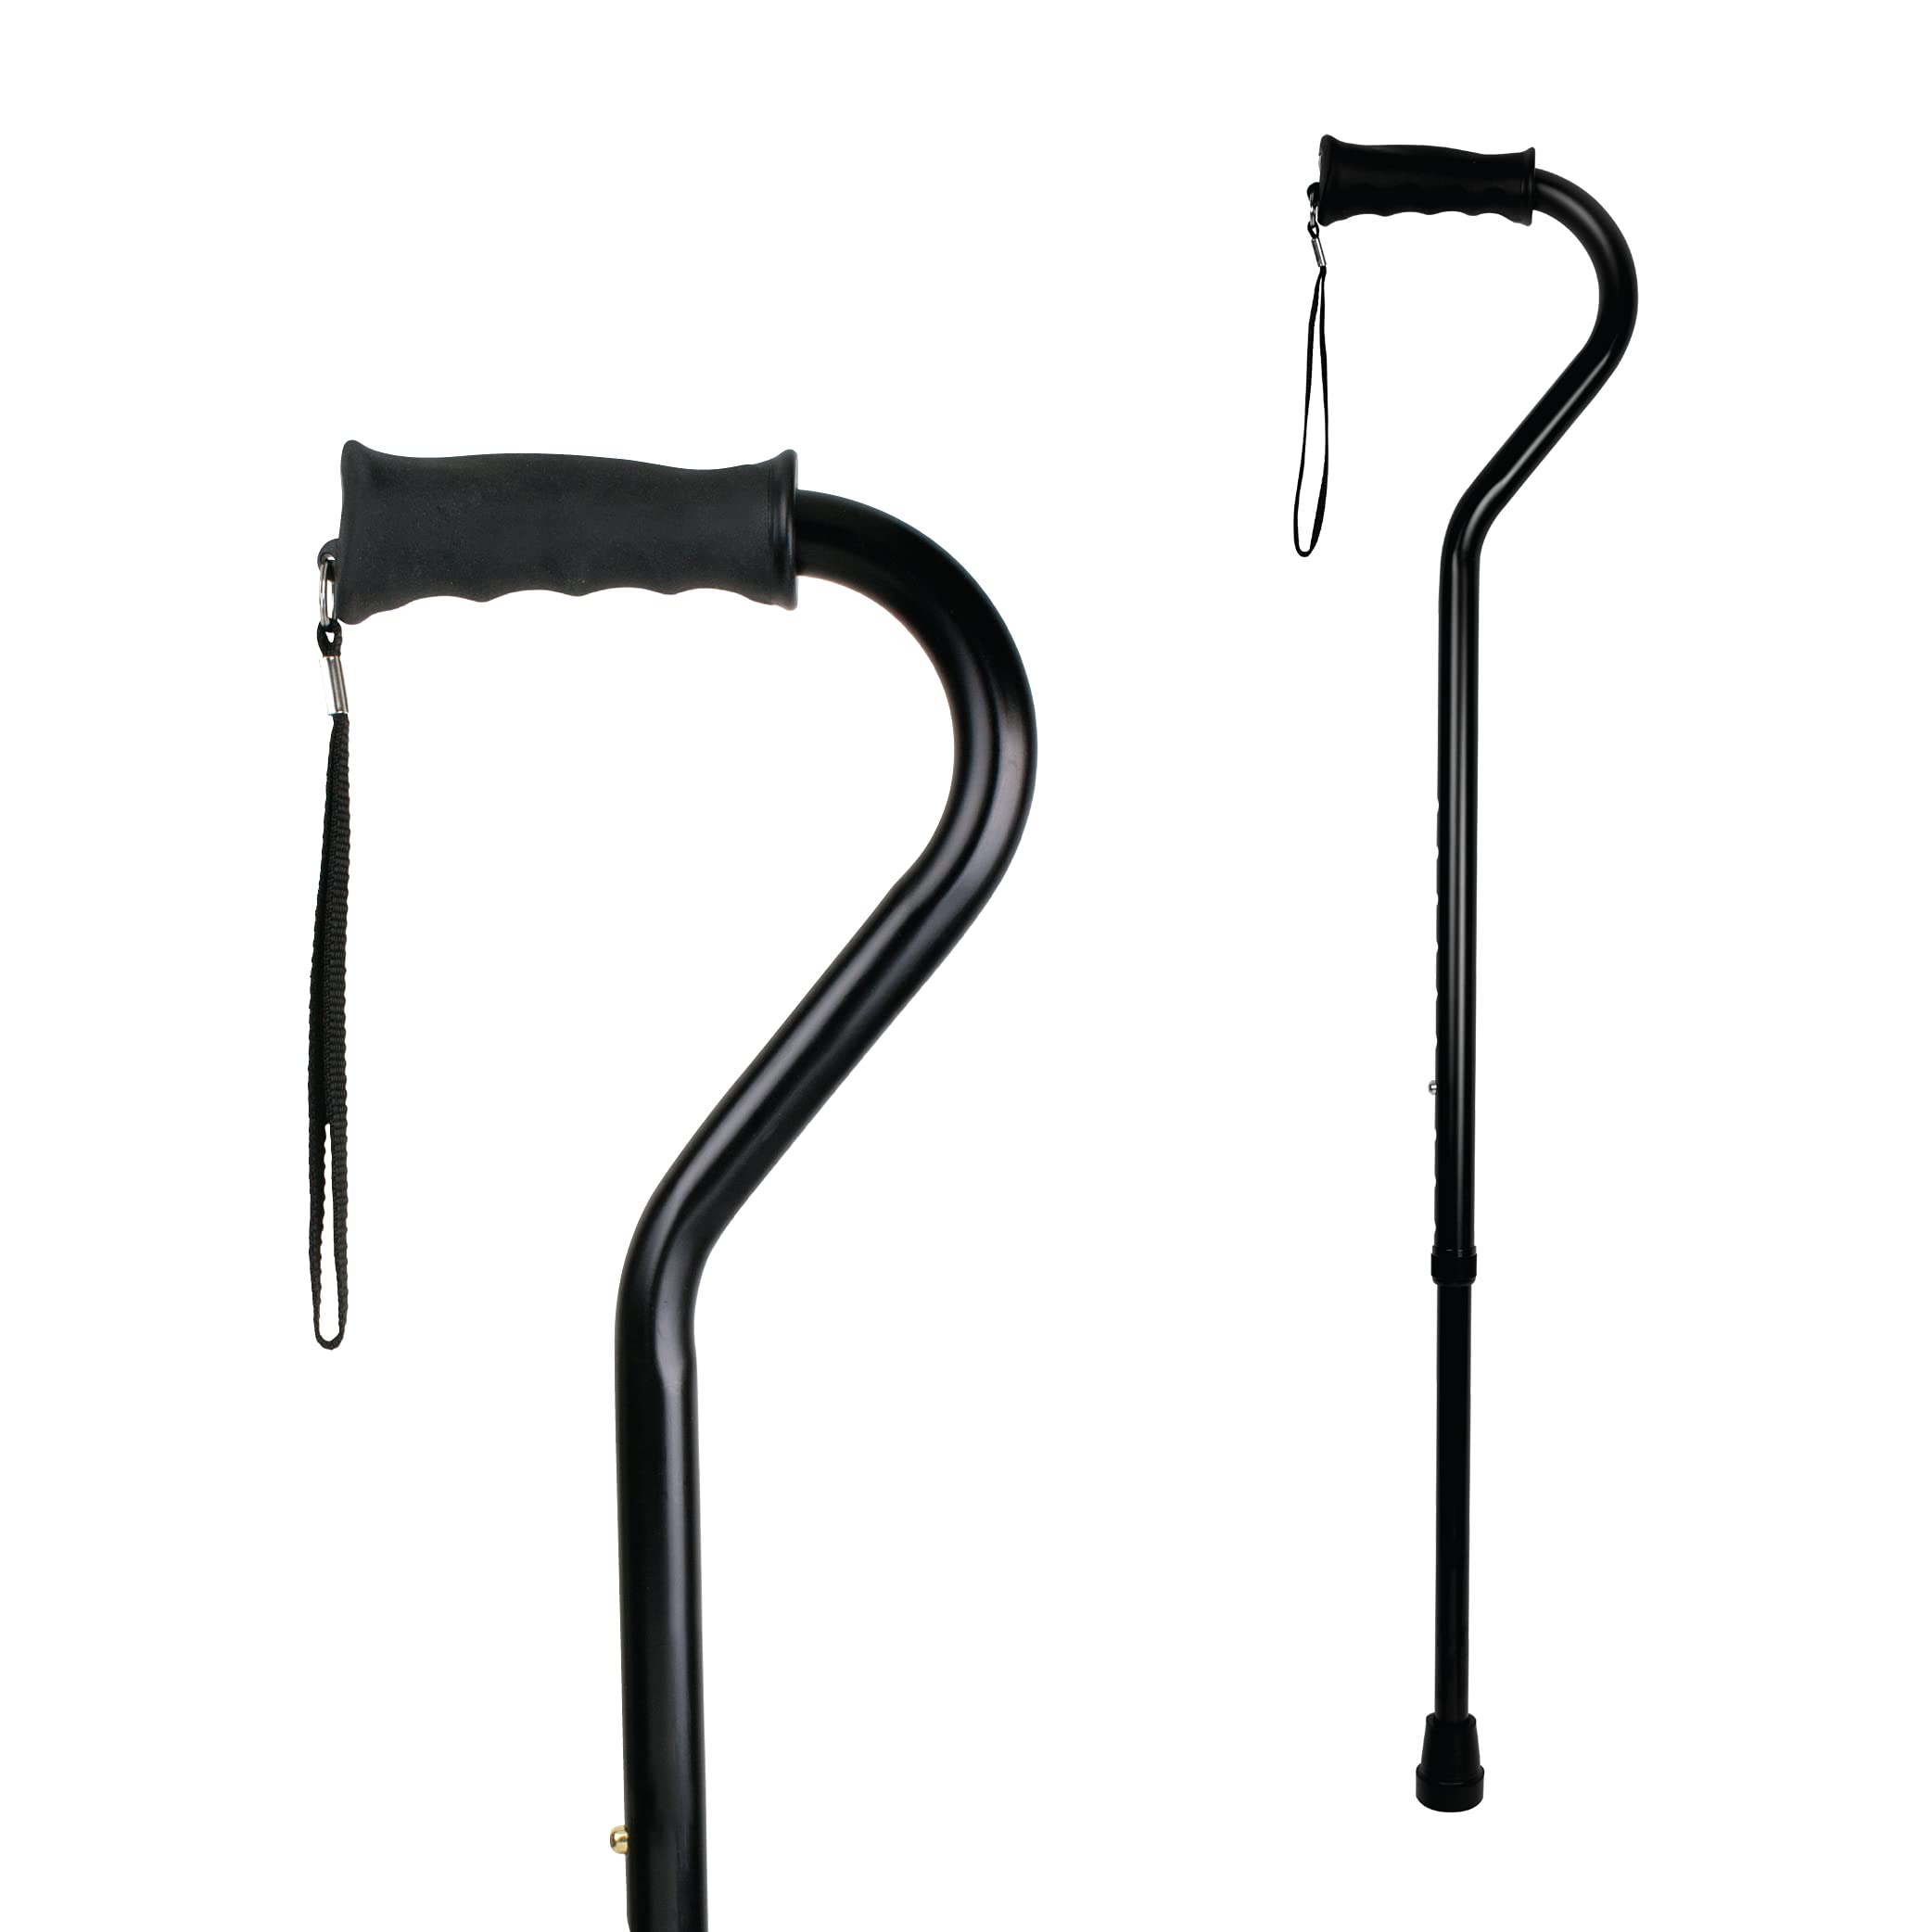 Carex Walking Cane with Soft Cushioned Handle - Adjustable Walking Cane for Men or Women - Black Cane